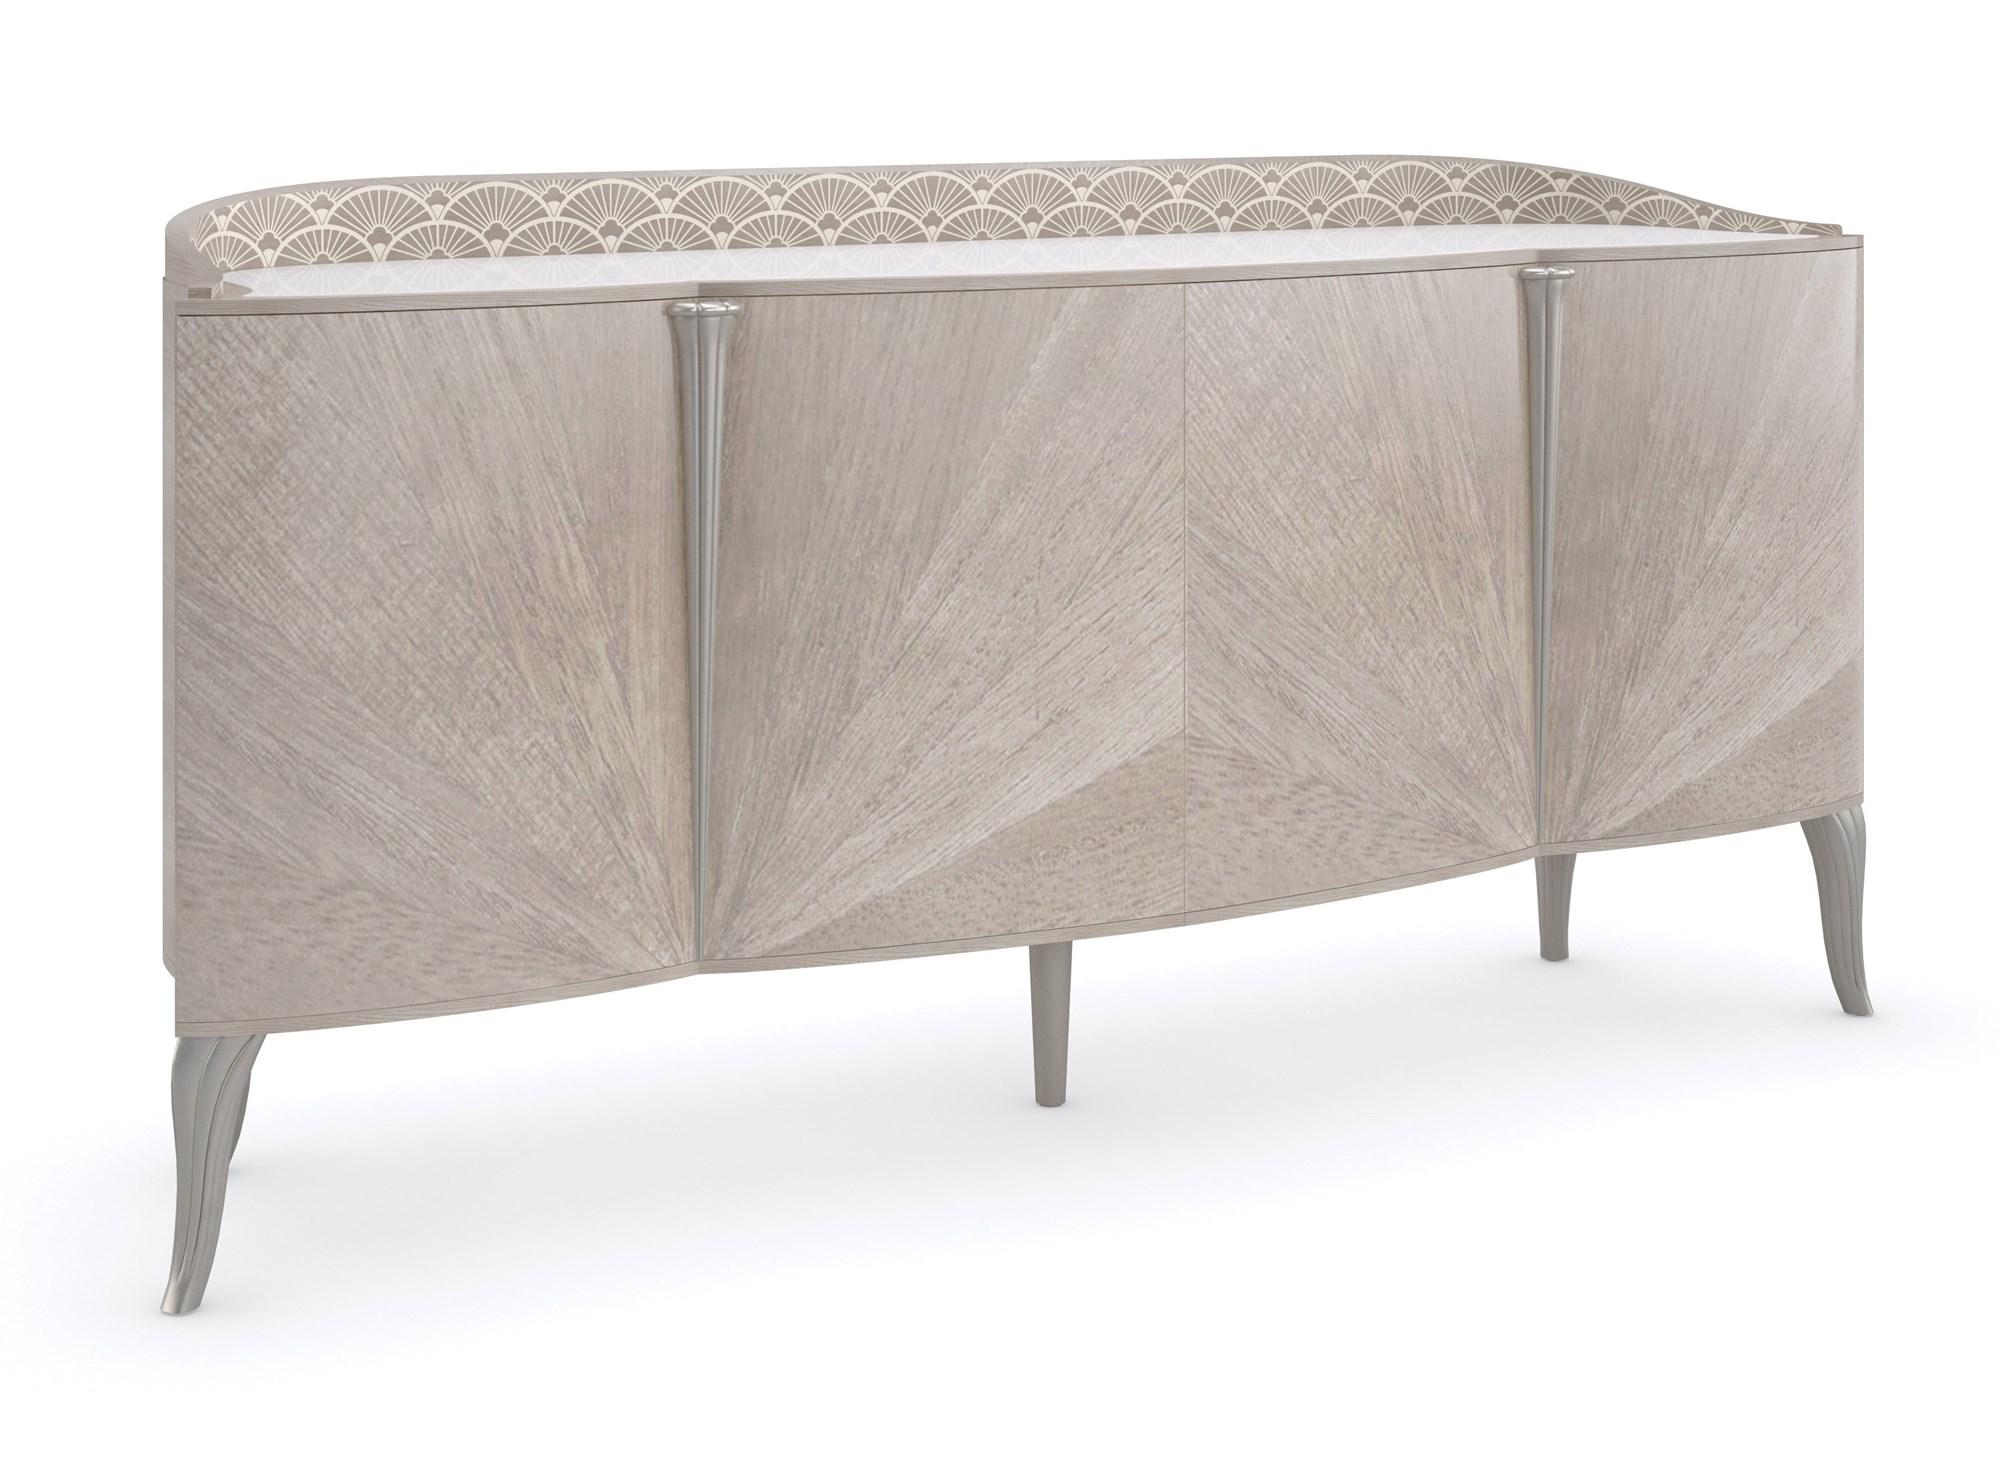 Contemporary Sideboard LILLIAN C092-020-211 in Taupe 